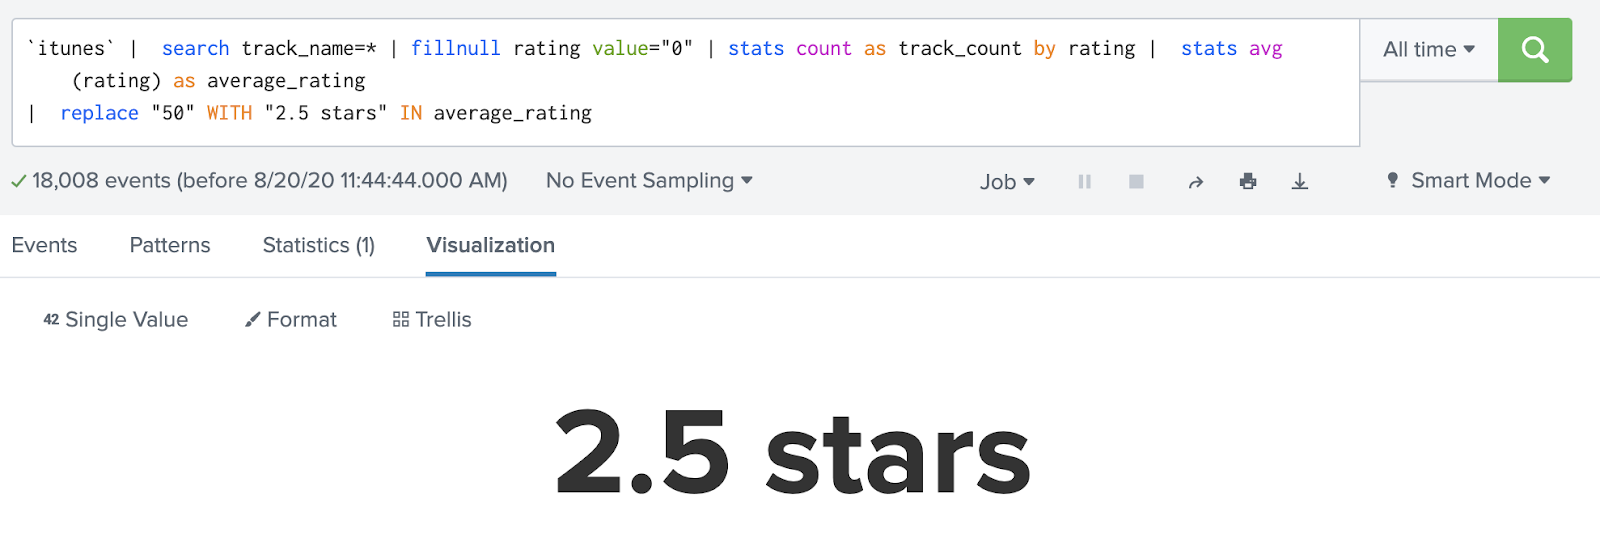 Screenshot of splunk search and visualization showing “2.5 stars”. Splunk search is: itunes | search track_name=* | fillnull rating value=“0” | stats count as track_count by rating | stats avg(rating) as average_rating | replace “50” WITH “2.5 stars” IN average_rating